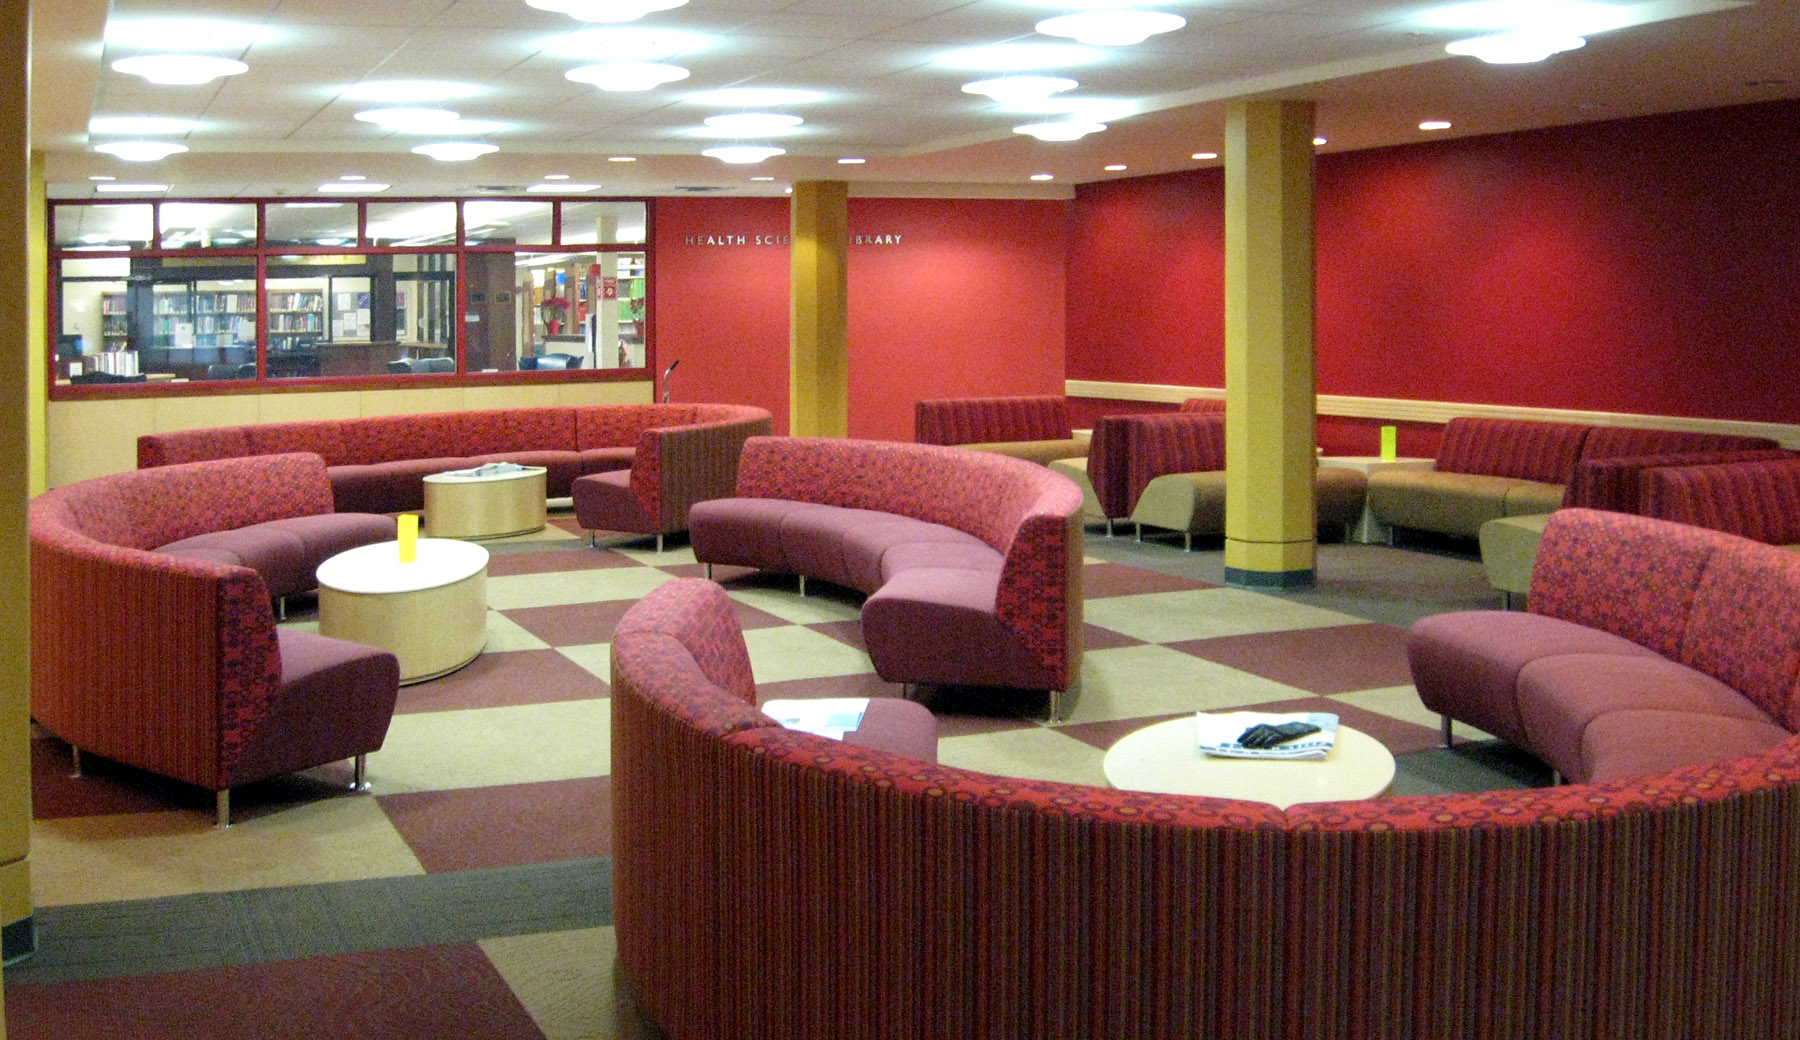 The New York Medical College worked with Lothrop Associates to bring an updated look to their Student Lounge. The design incorporates school colors and movable custom furniture so the room can be reconfigured for other functions.